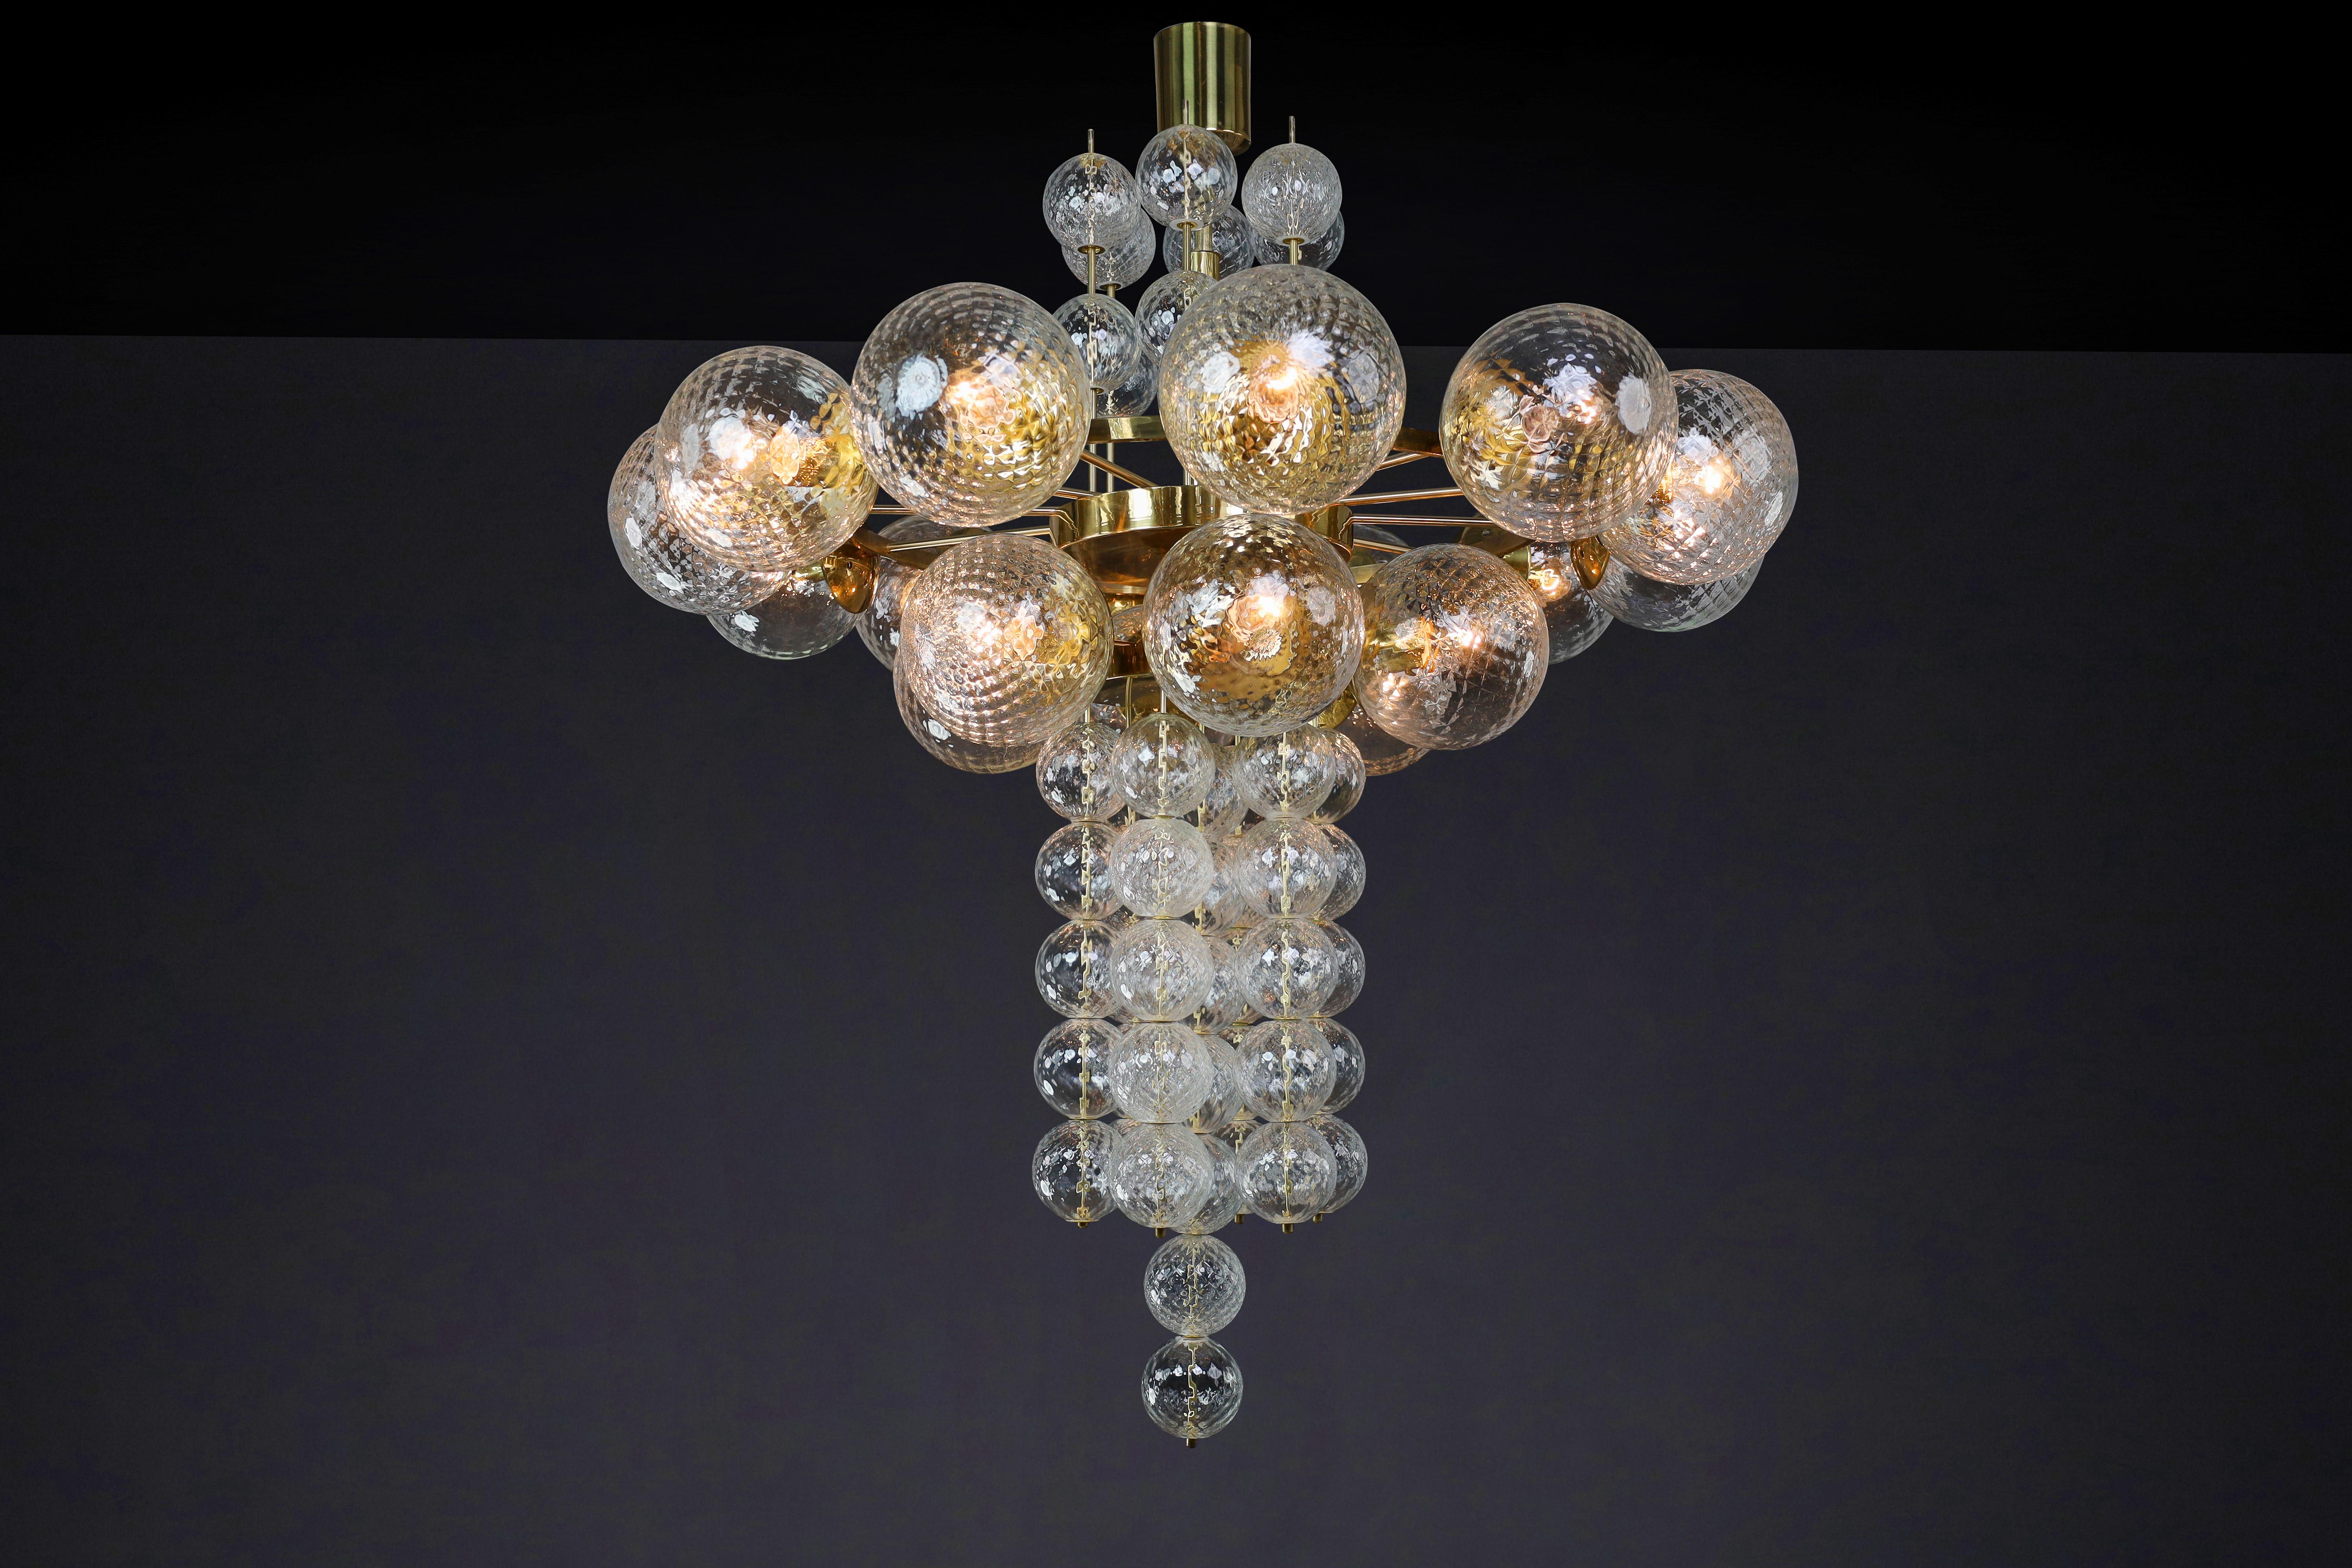 Large Chandelier with brass fixture and hand-blowed glass globes by Preciosa Cz. For Sale 7